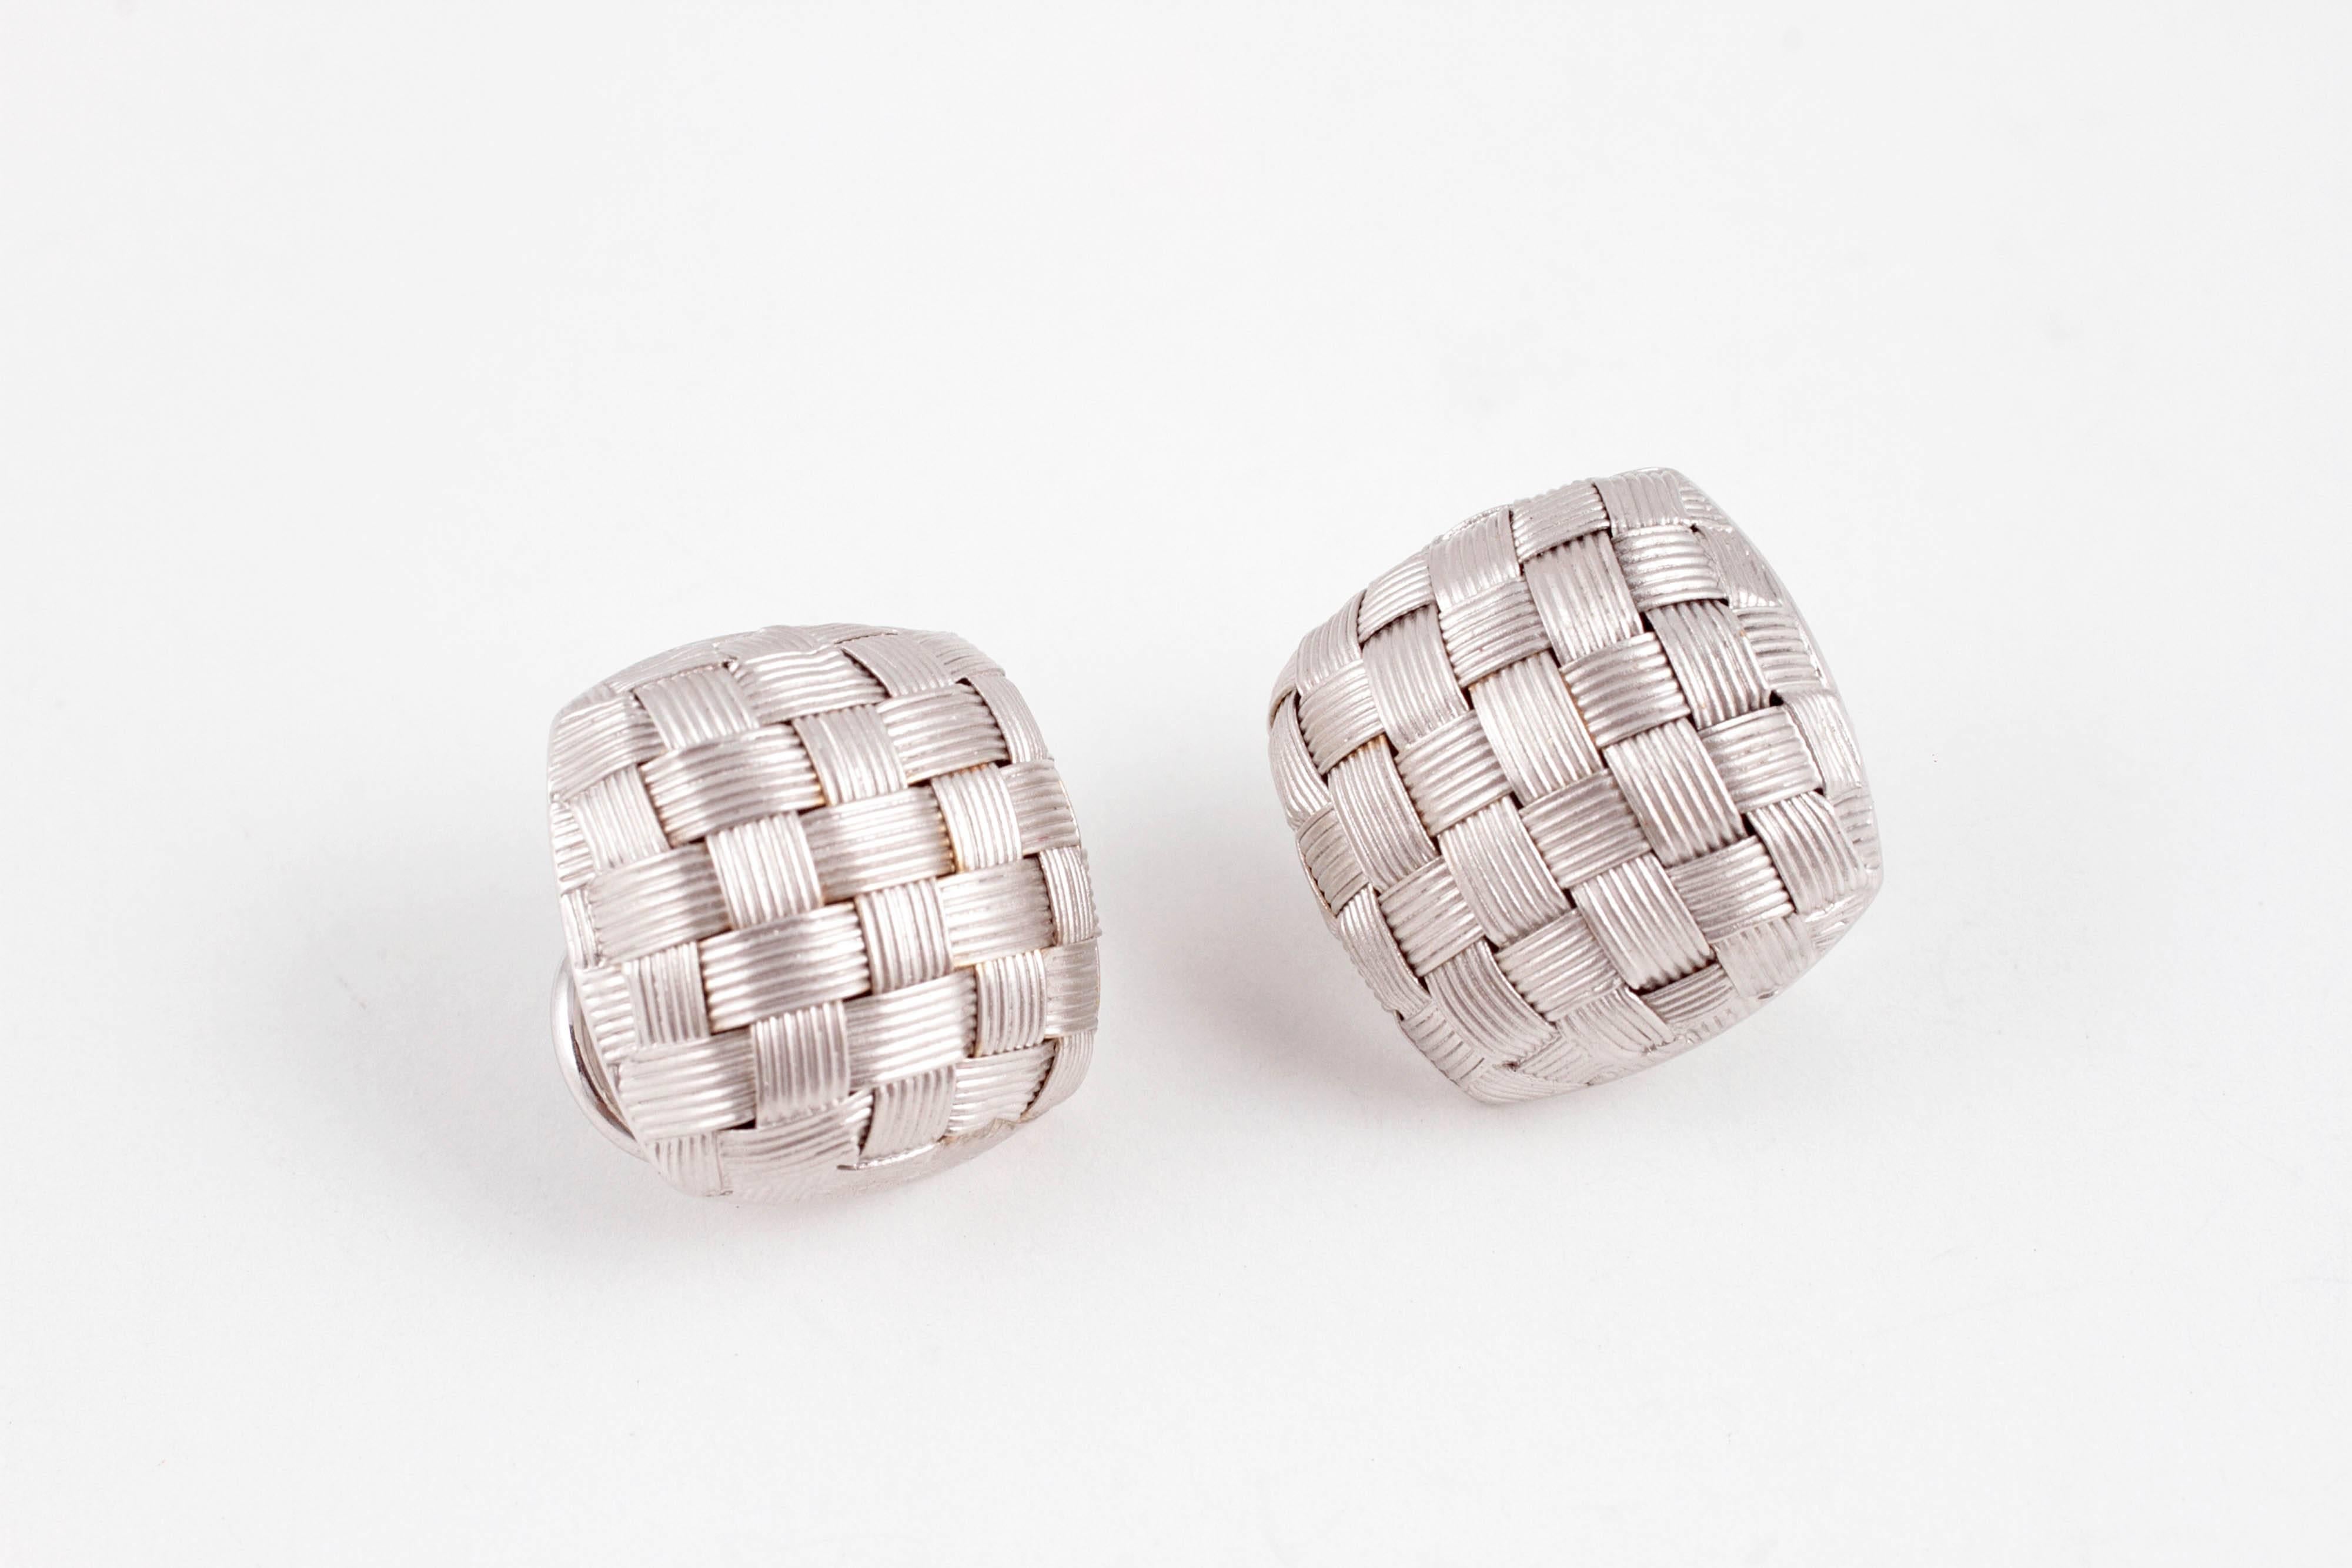 Measuring 15.00 mm x 15.00 mm, secured with a pierced/clip back, these lovely 18 karat white gold, Italian earrings are a must for every jewelry box!